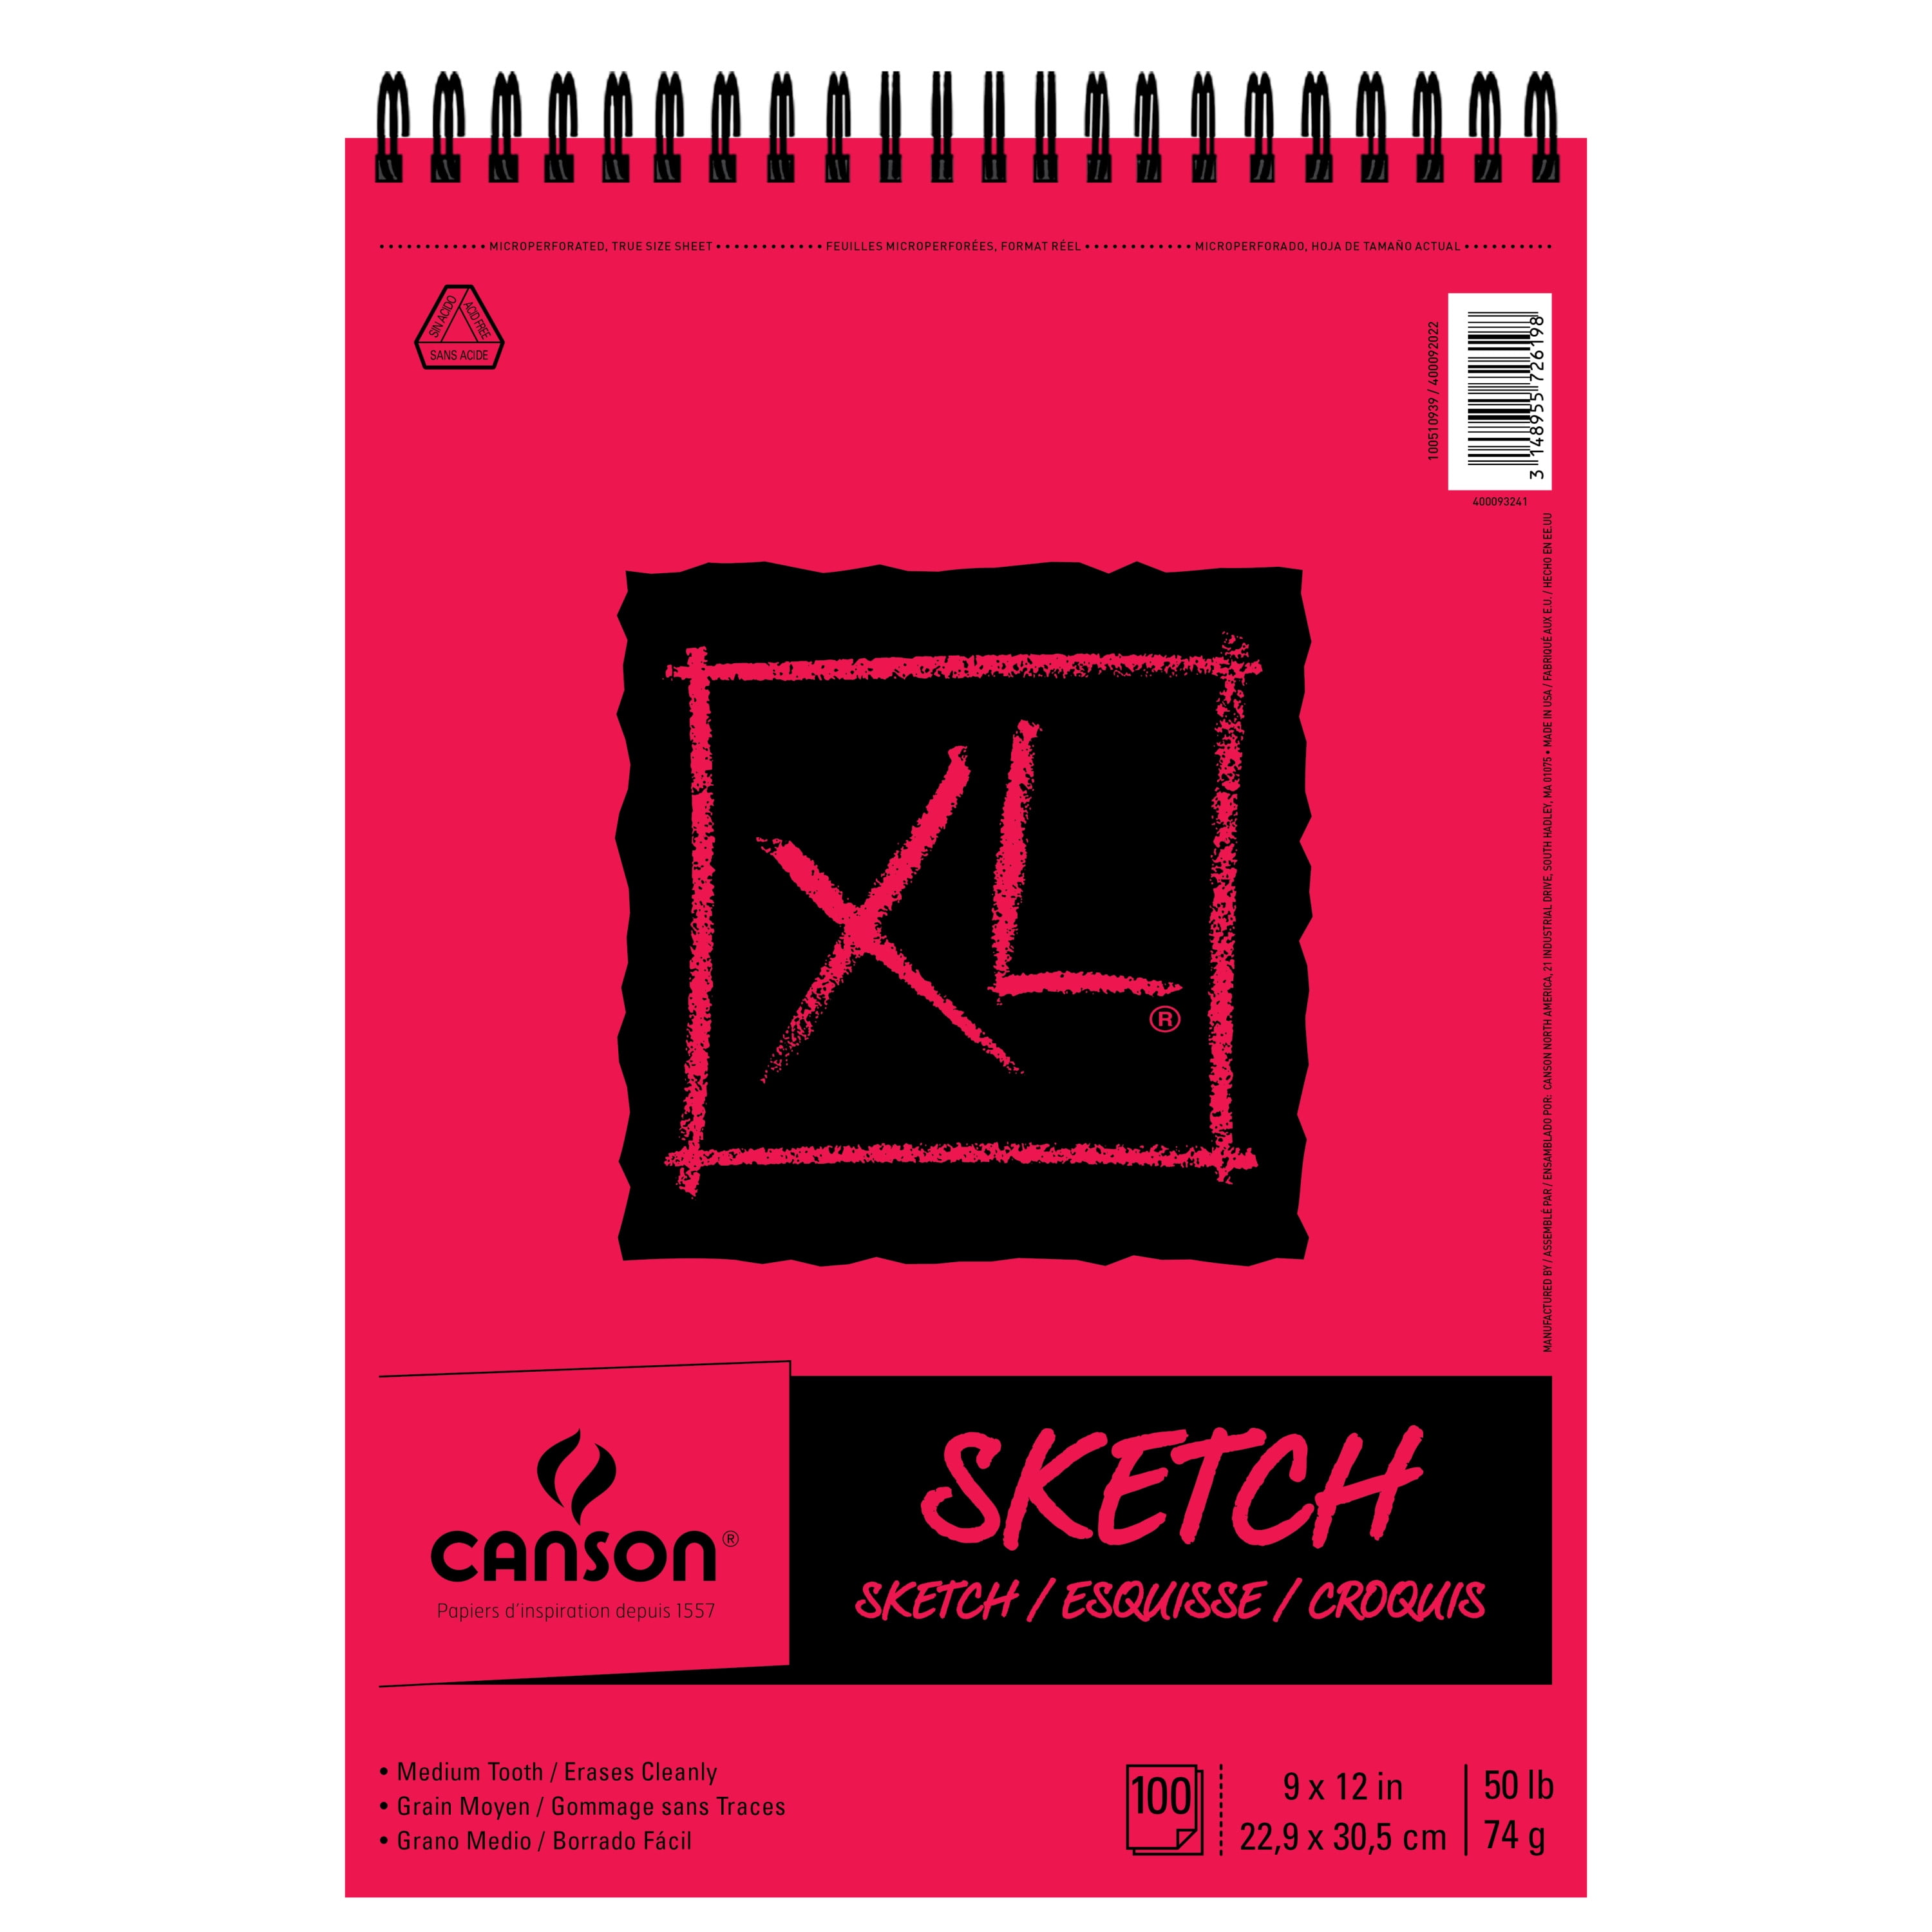 Canson XL Sketchbook, 100 sheets